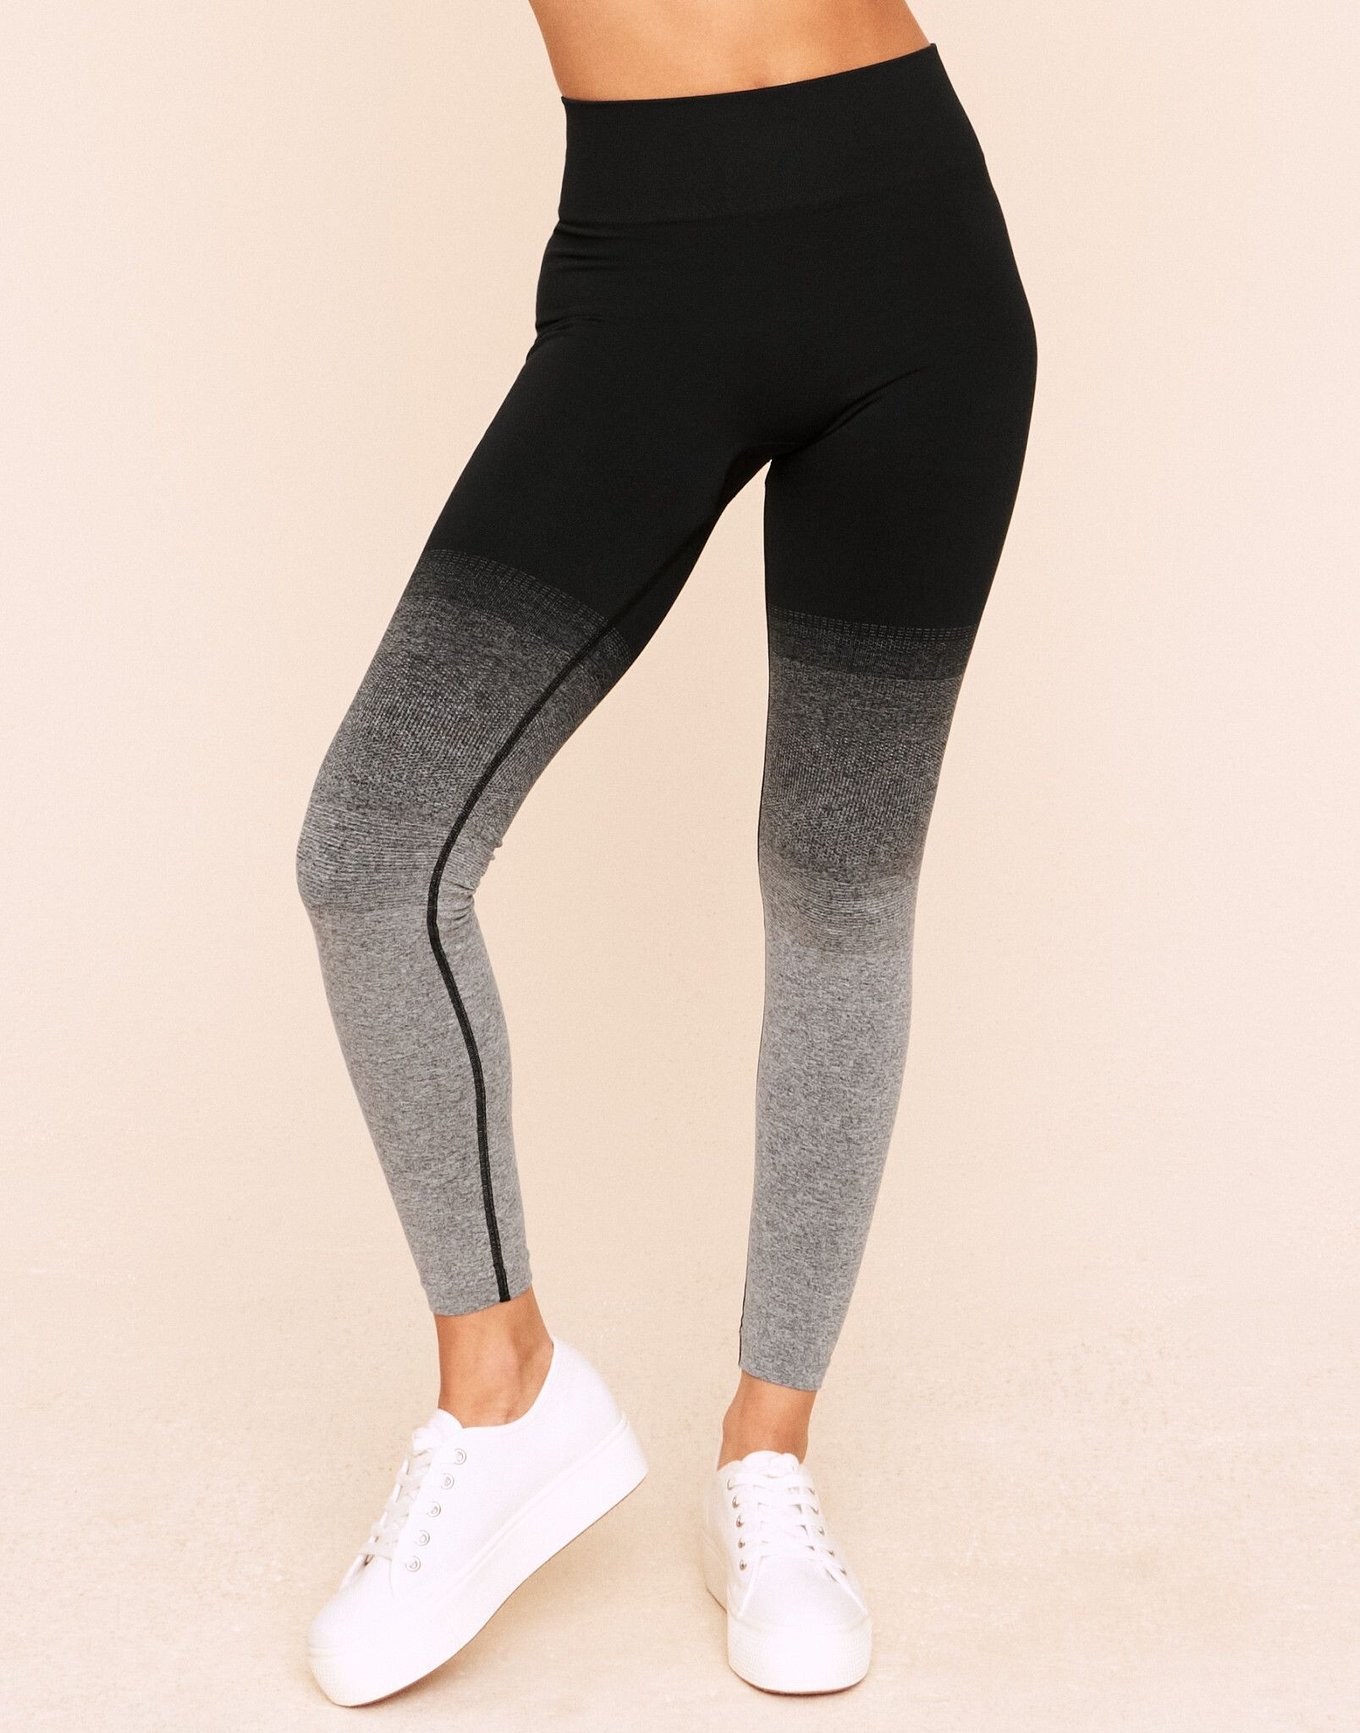 Women's Active Ombre Leggings (4 Colors, Only Small and Medium Size Left)